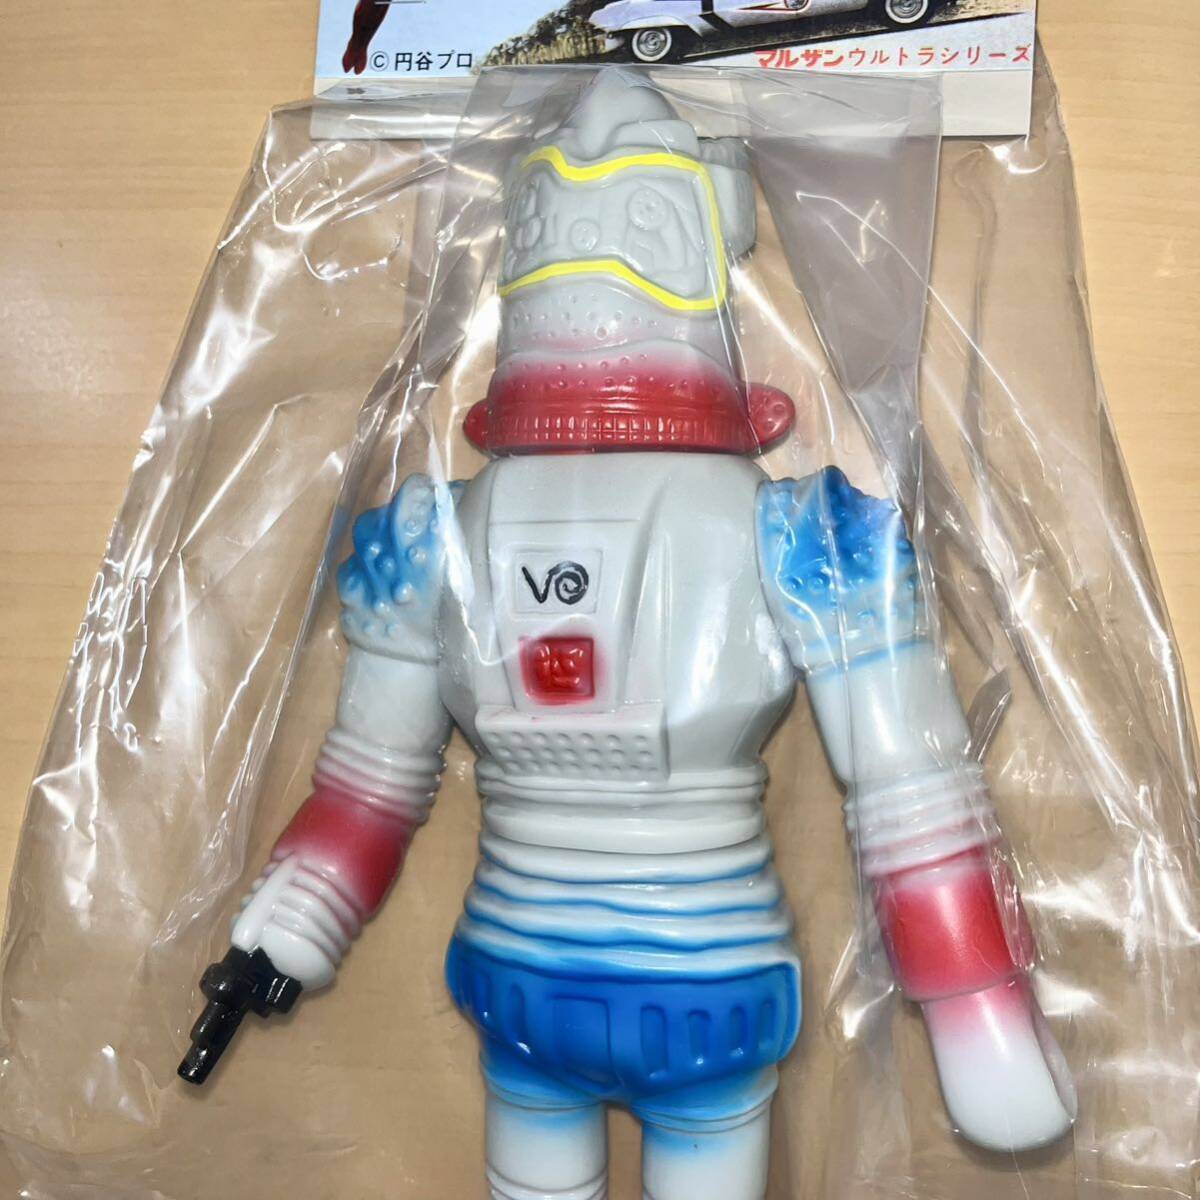 Marusan Mr. Ms. 450 Showa Image Phosphorescent GID Hashimoto Toy Overall heigh